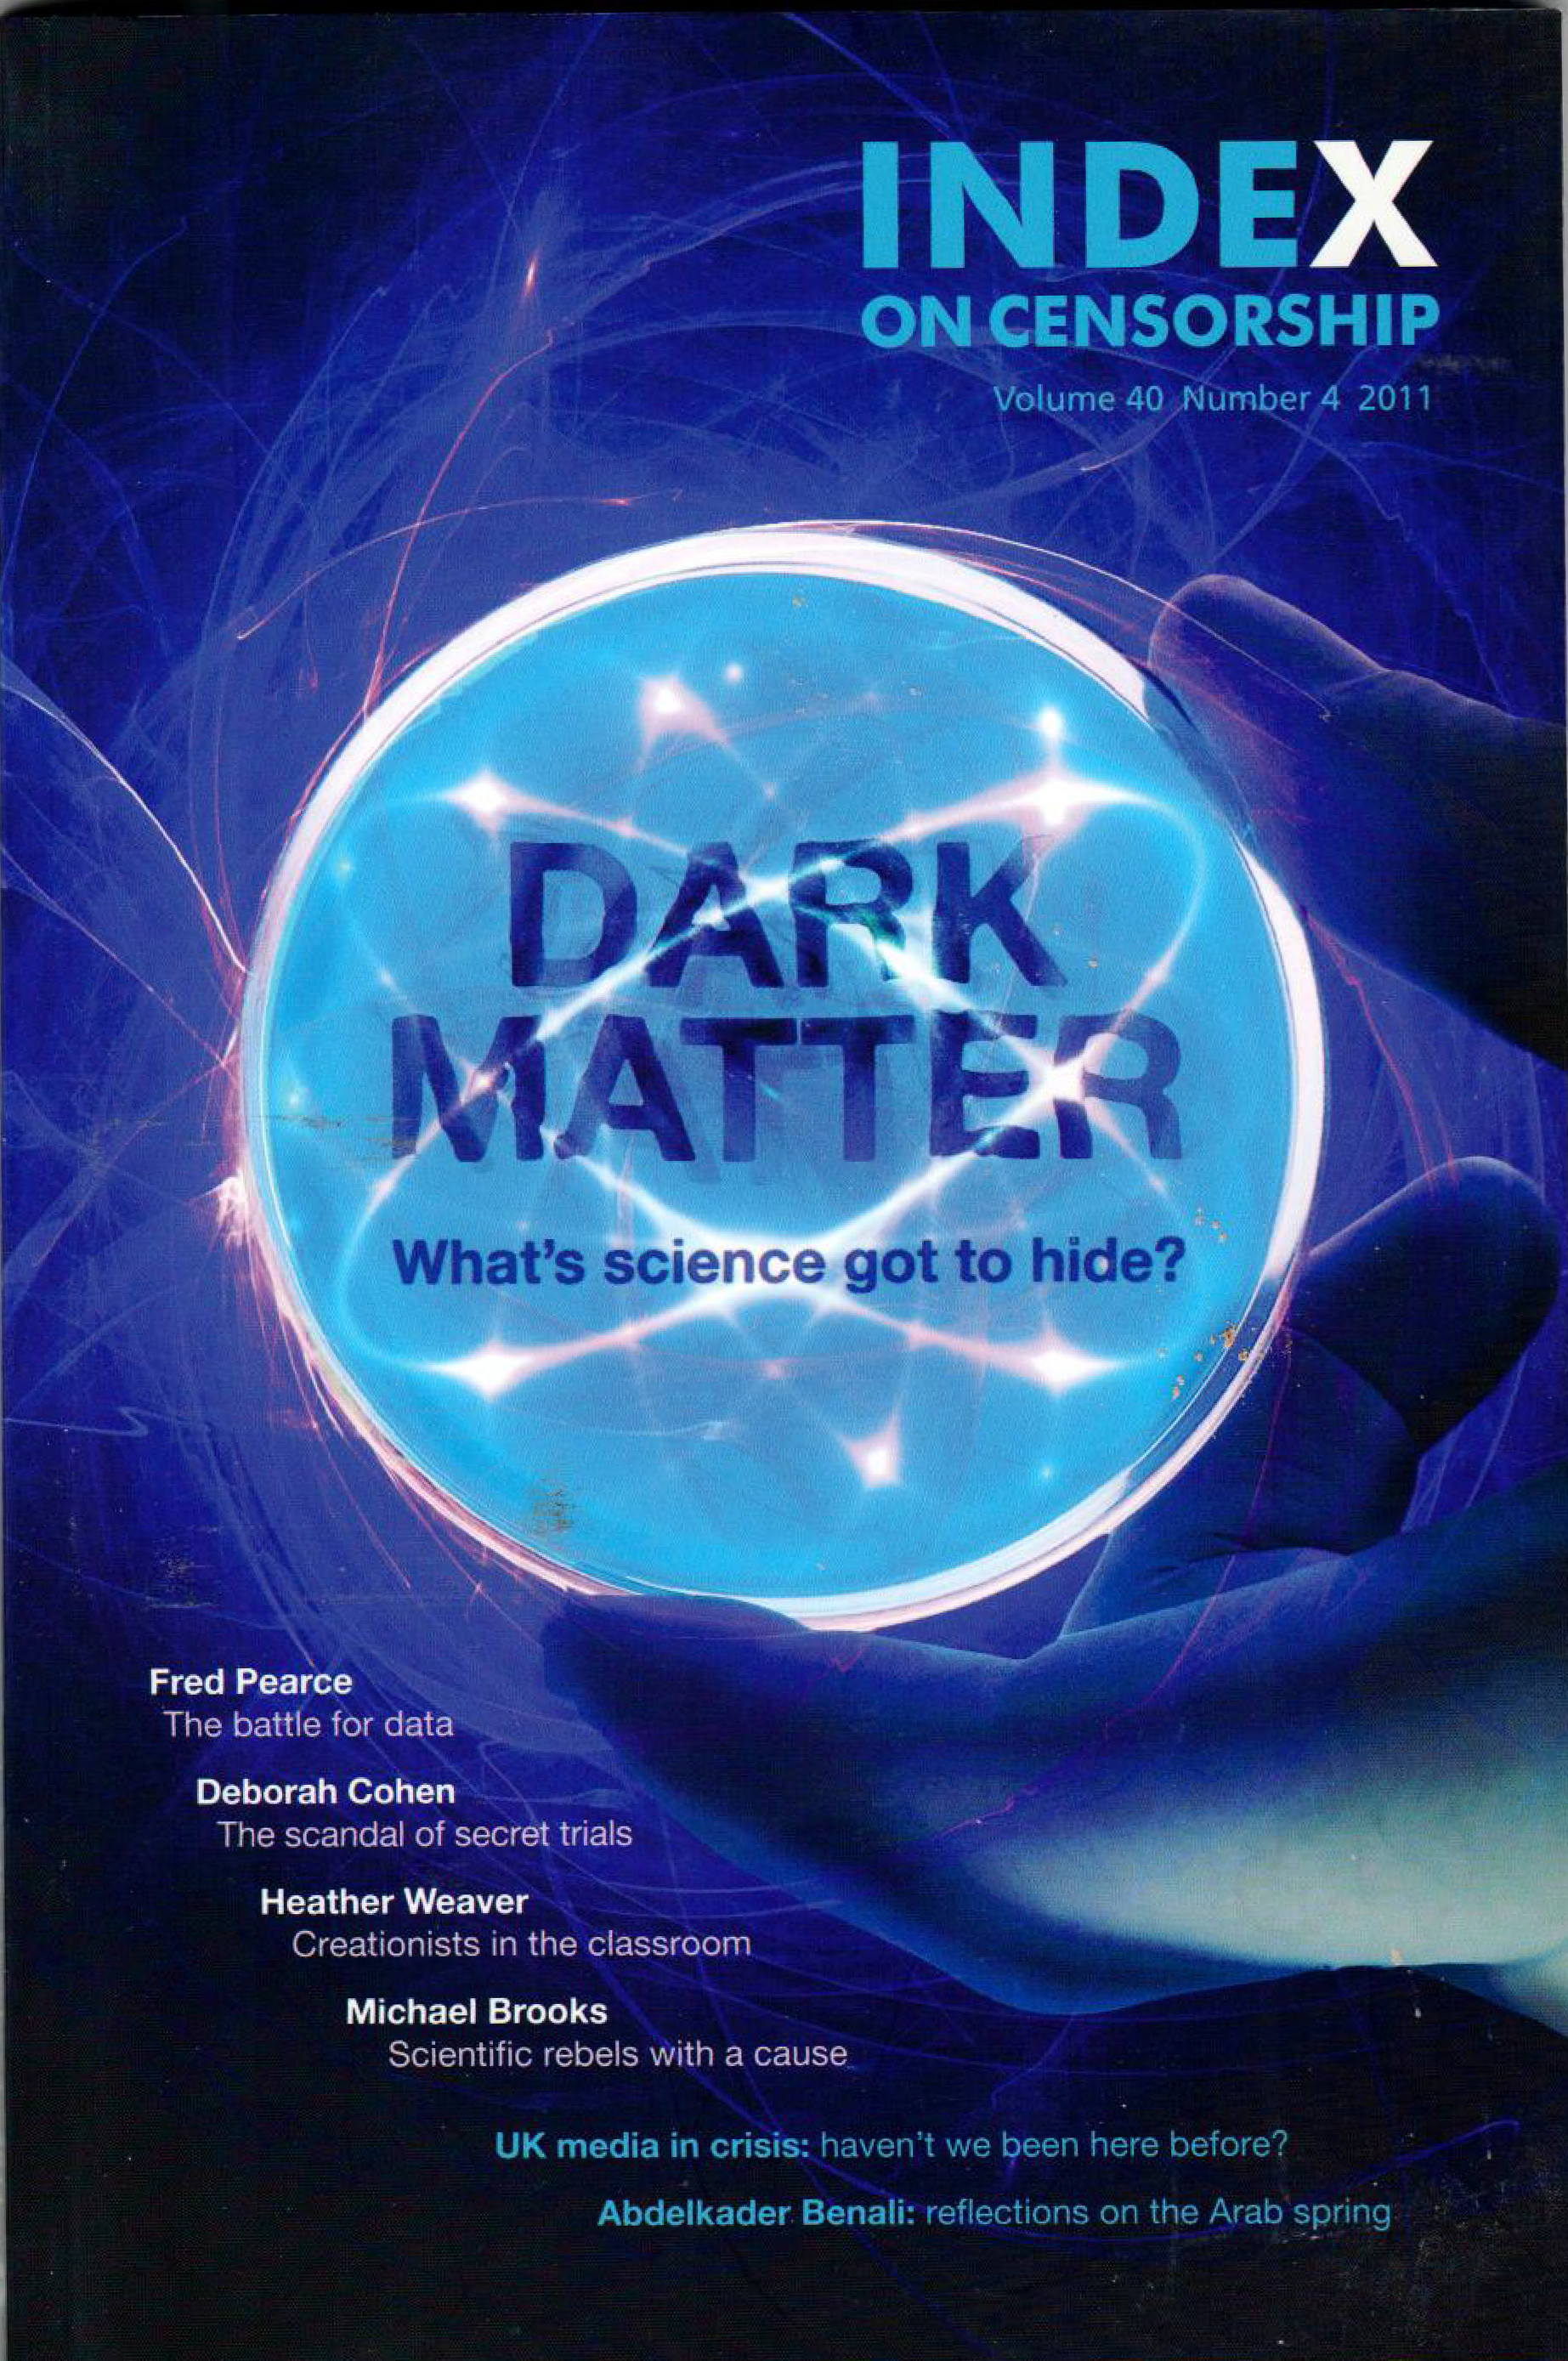 Dark Matter, the winter 2011 issue of the magazine explores the limits on scientific debate